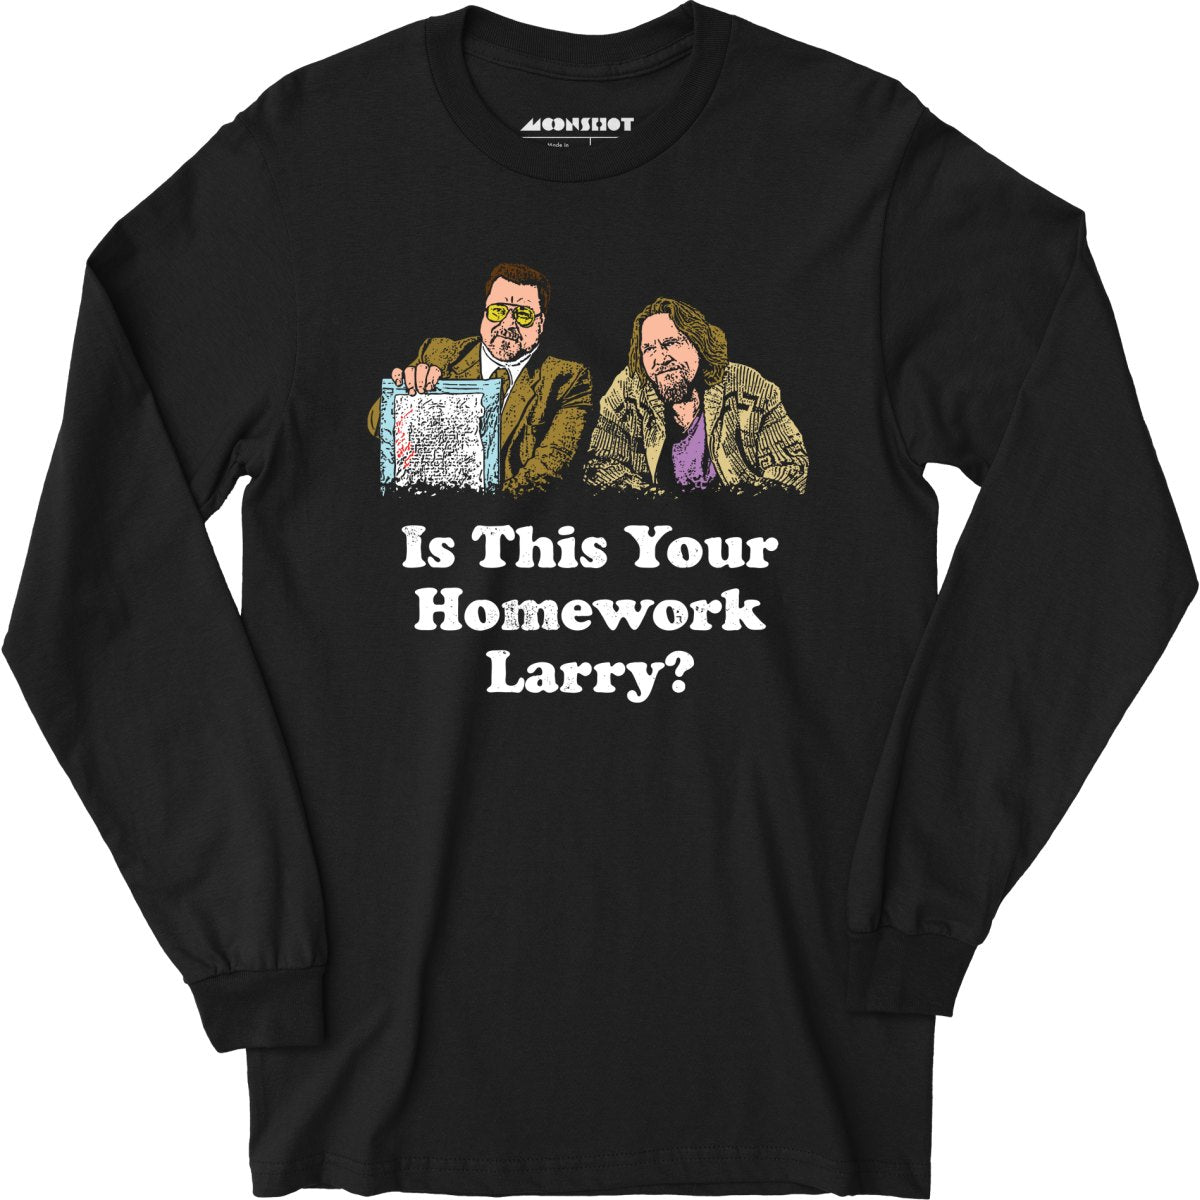 Is This Your Homework, Larry? - Long Sleeve T-Shirt